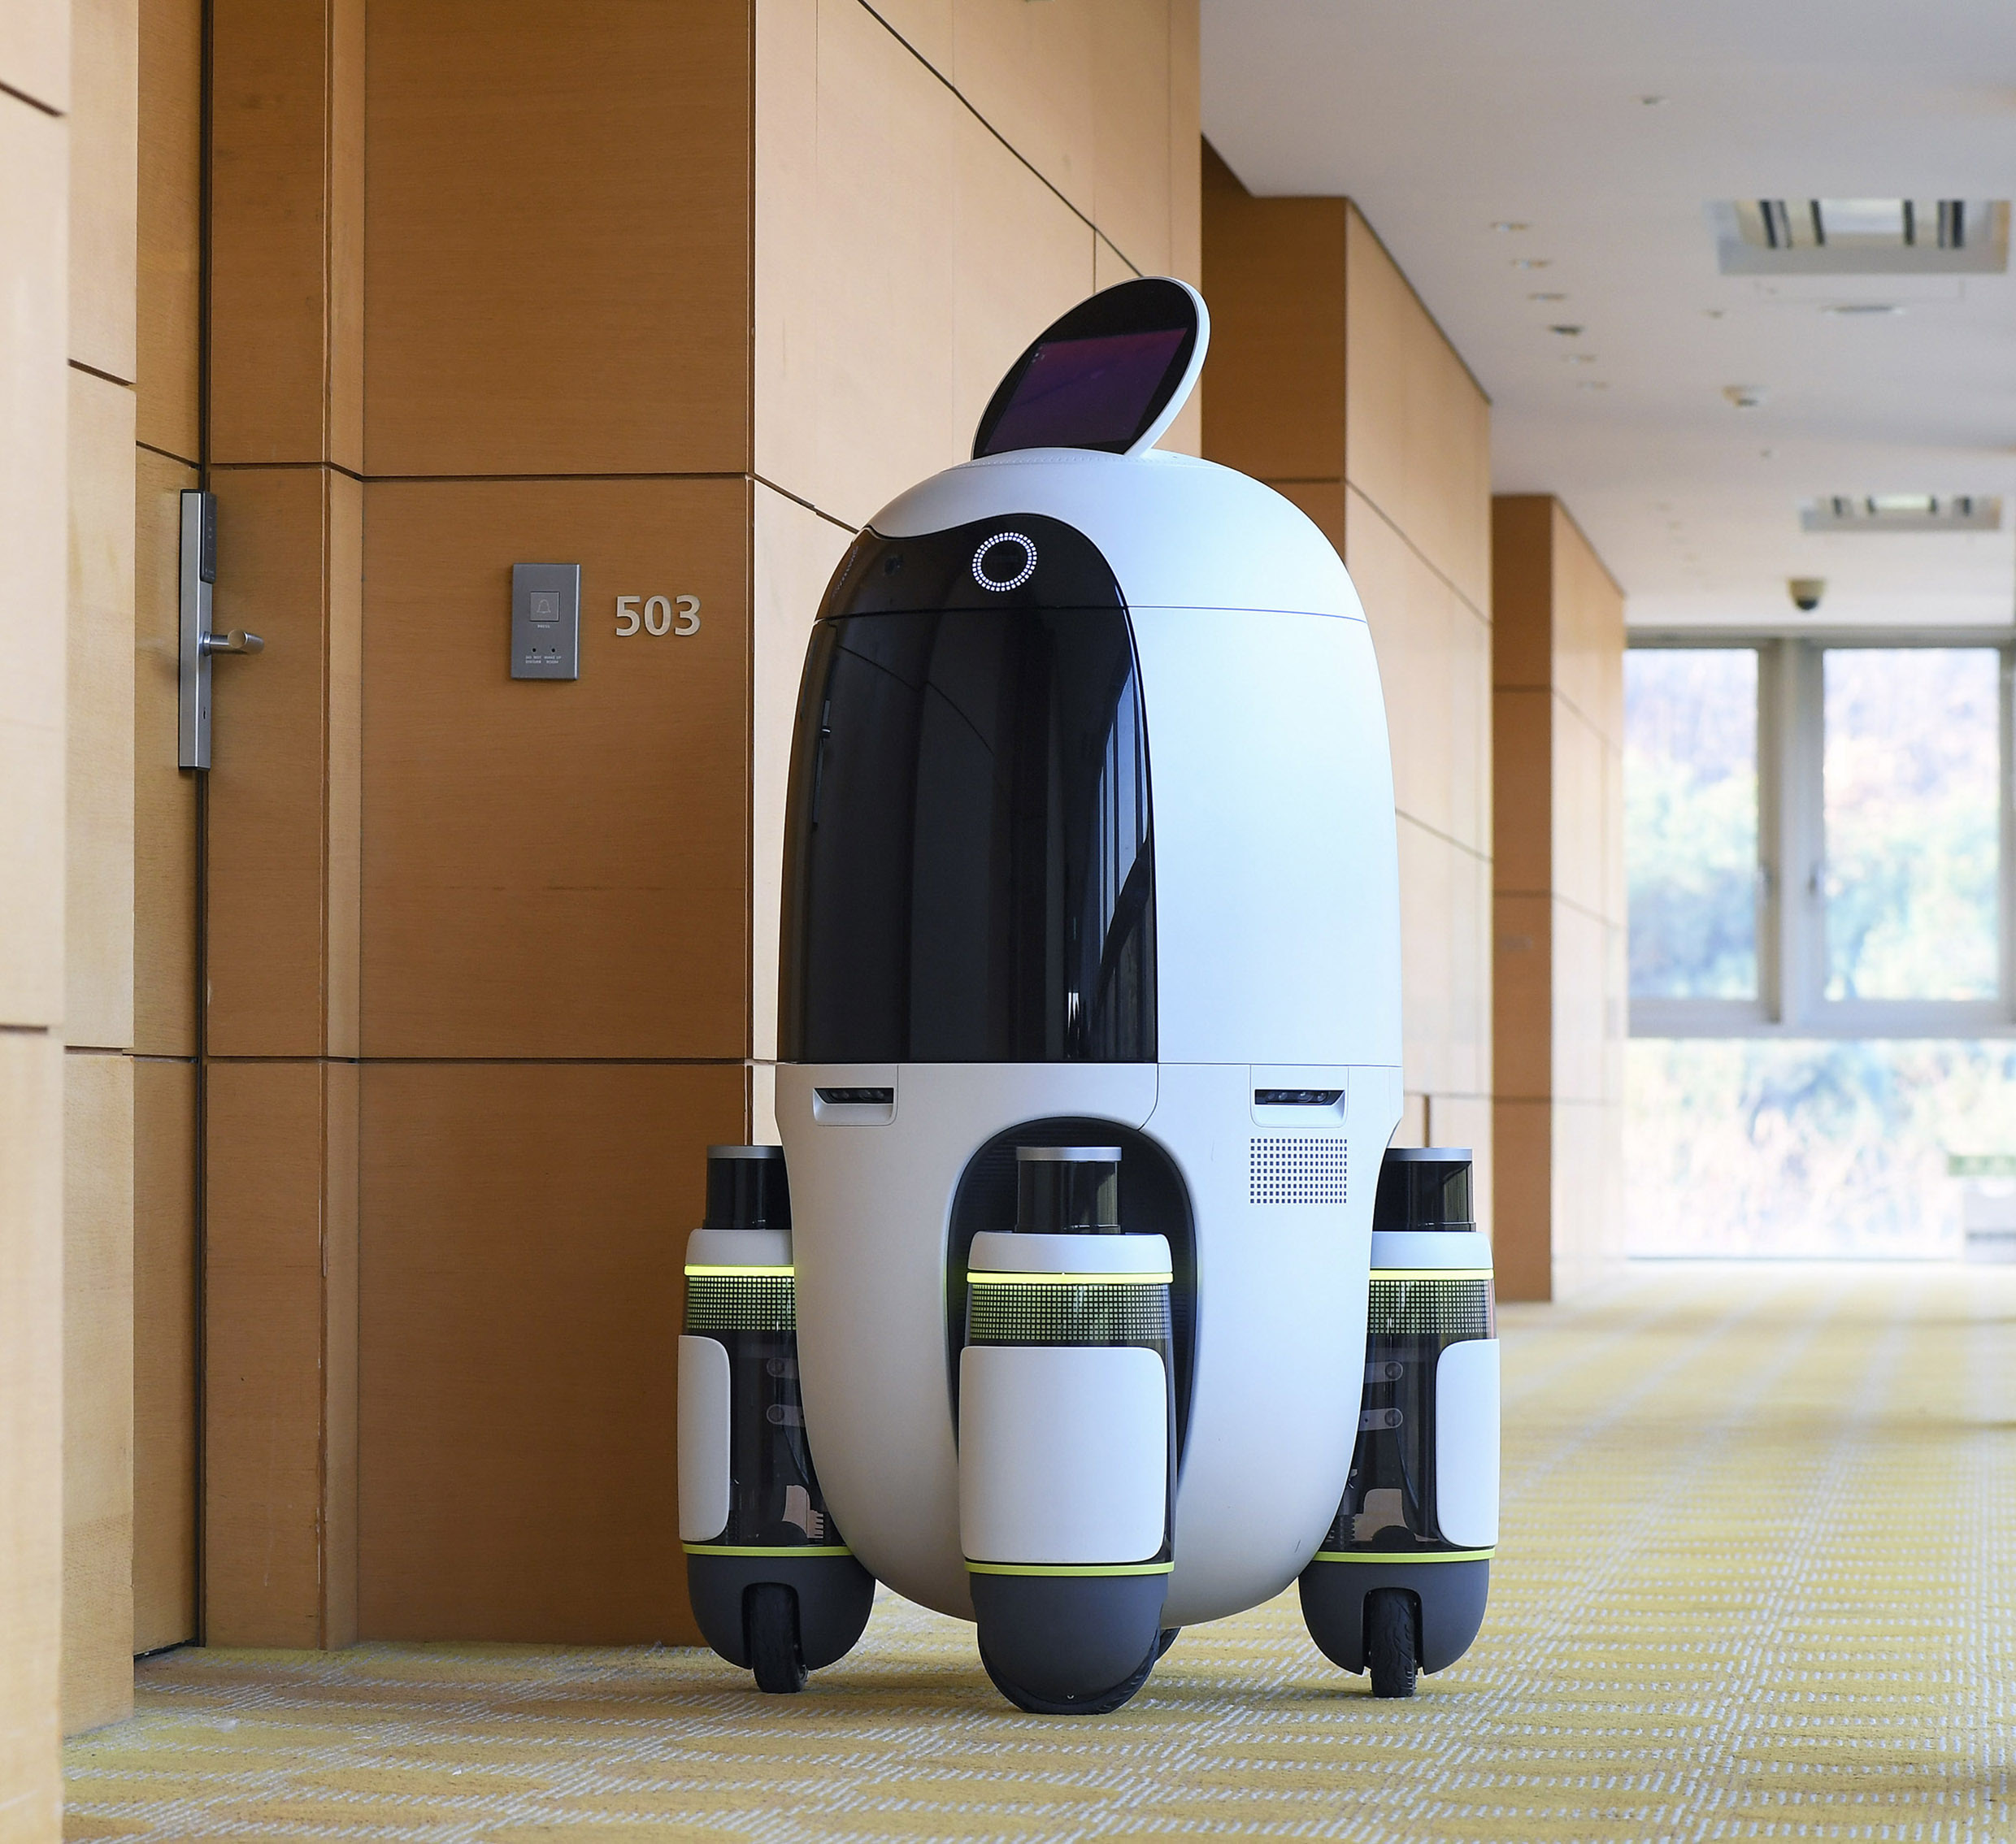 A delivery robot moving through a hotel hallway